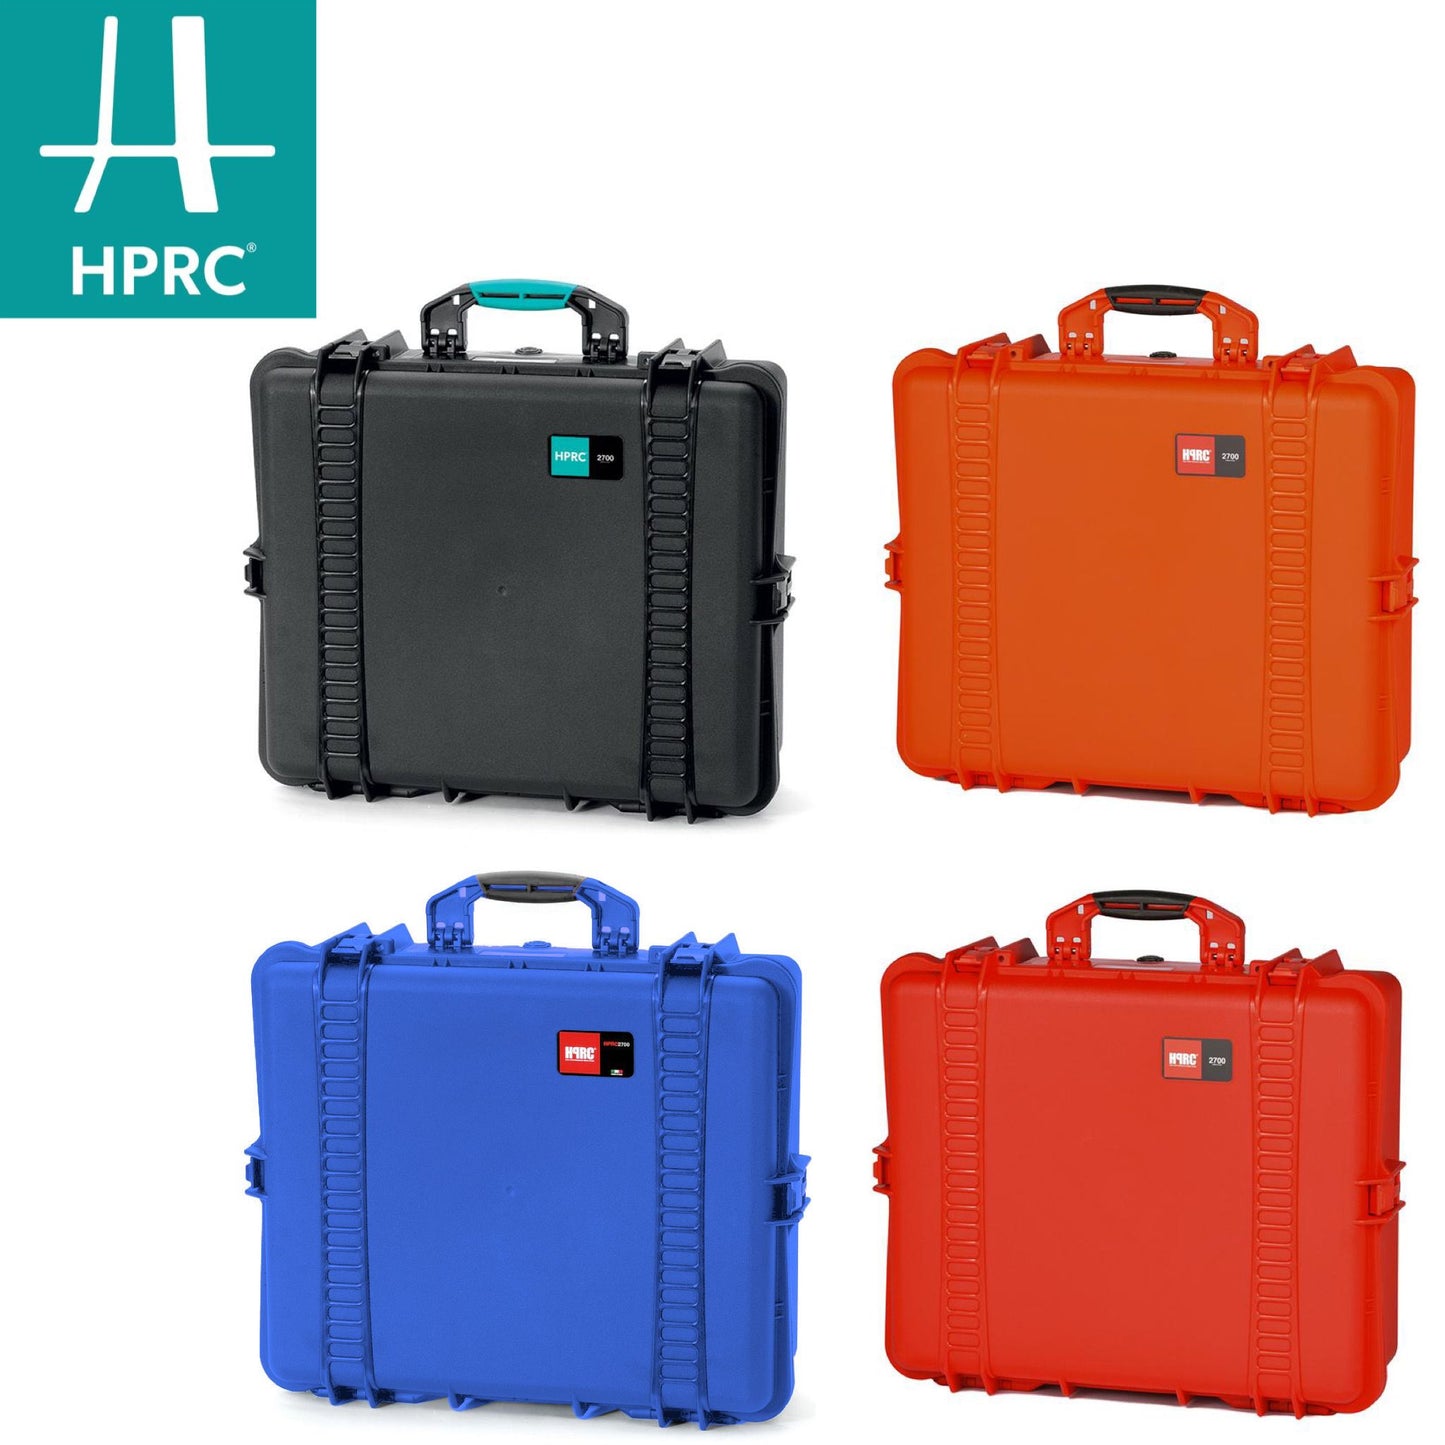 HPRC -High Performance Resin Cases (2700CUB) -Limited Lifetime Warranty